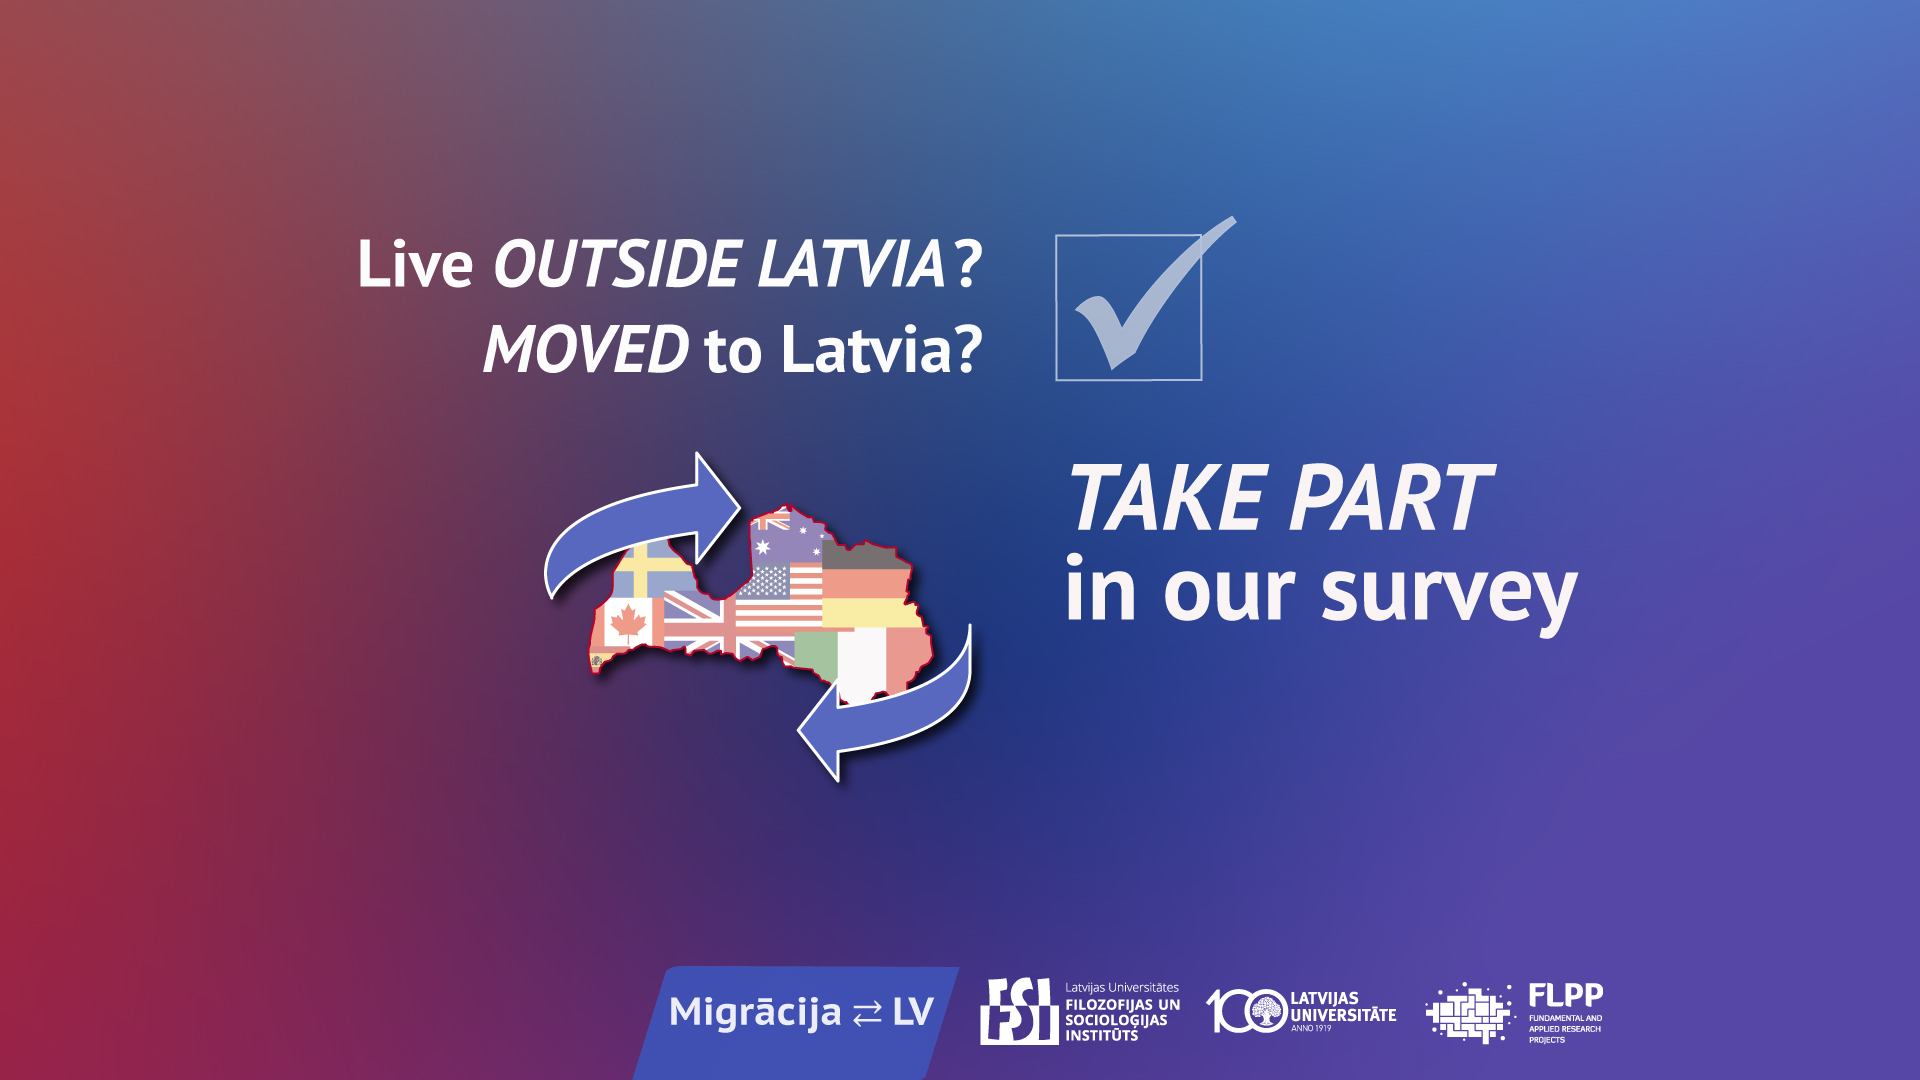 Live outside Latvia? Moved to Latvia? Participate in our survey!